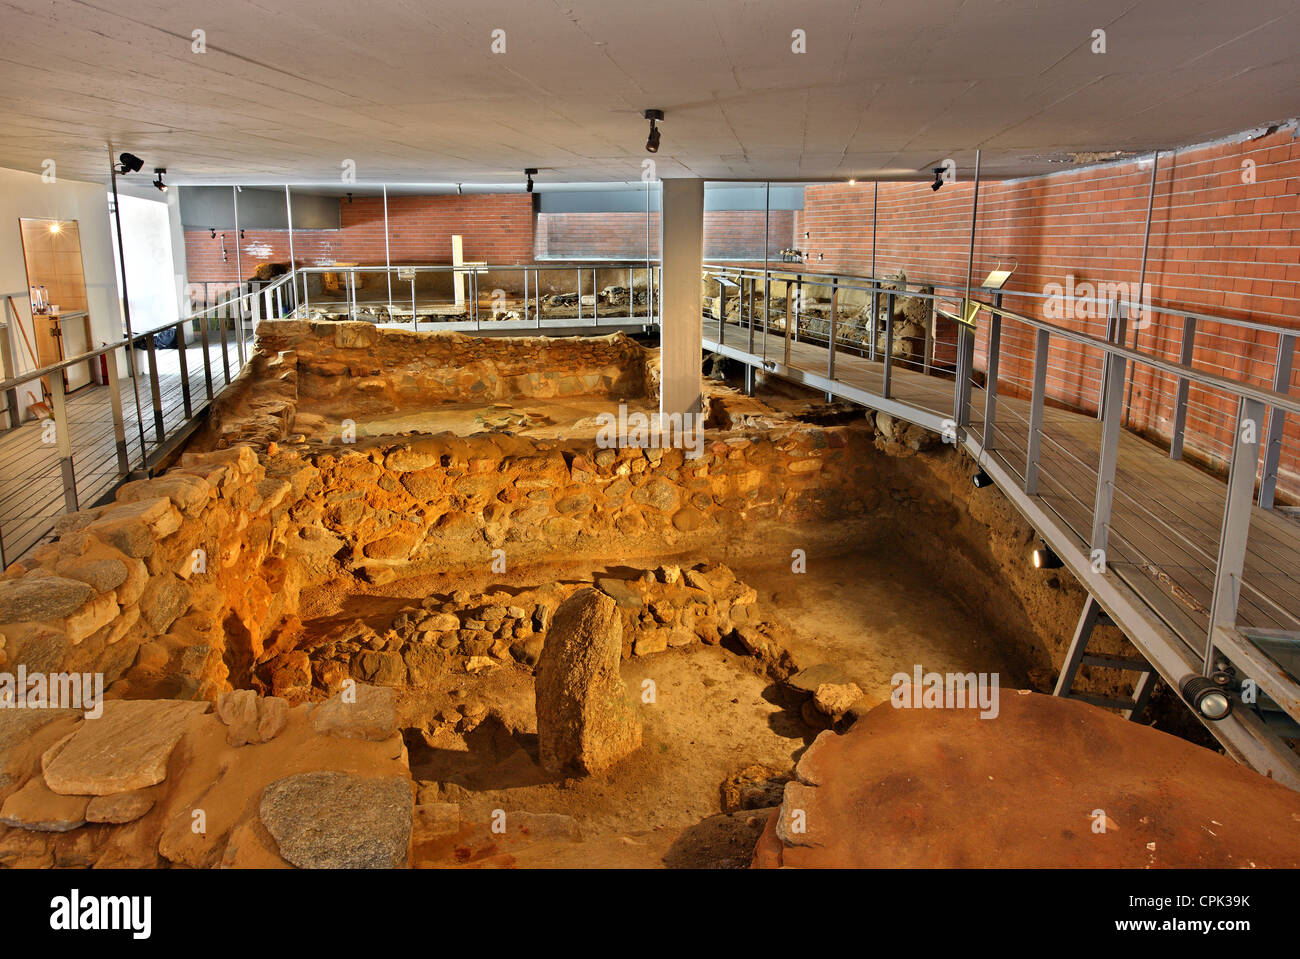 The 'On spot' archaeological museum (also known as 'Metropolis Site Museum'), Chora of Naxos, Naxos island, Cyclades, Greece. Stock Photo